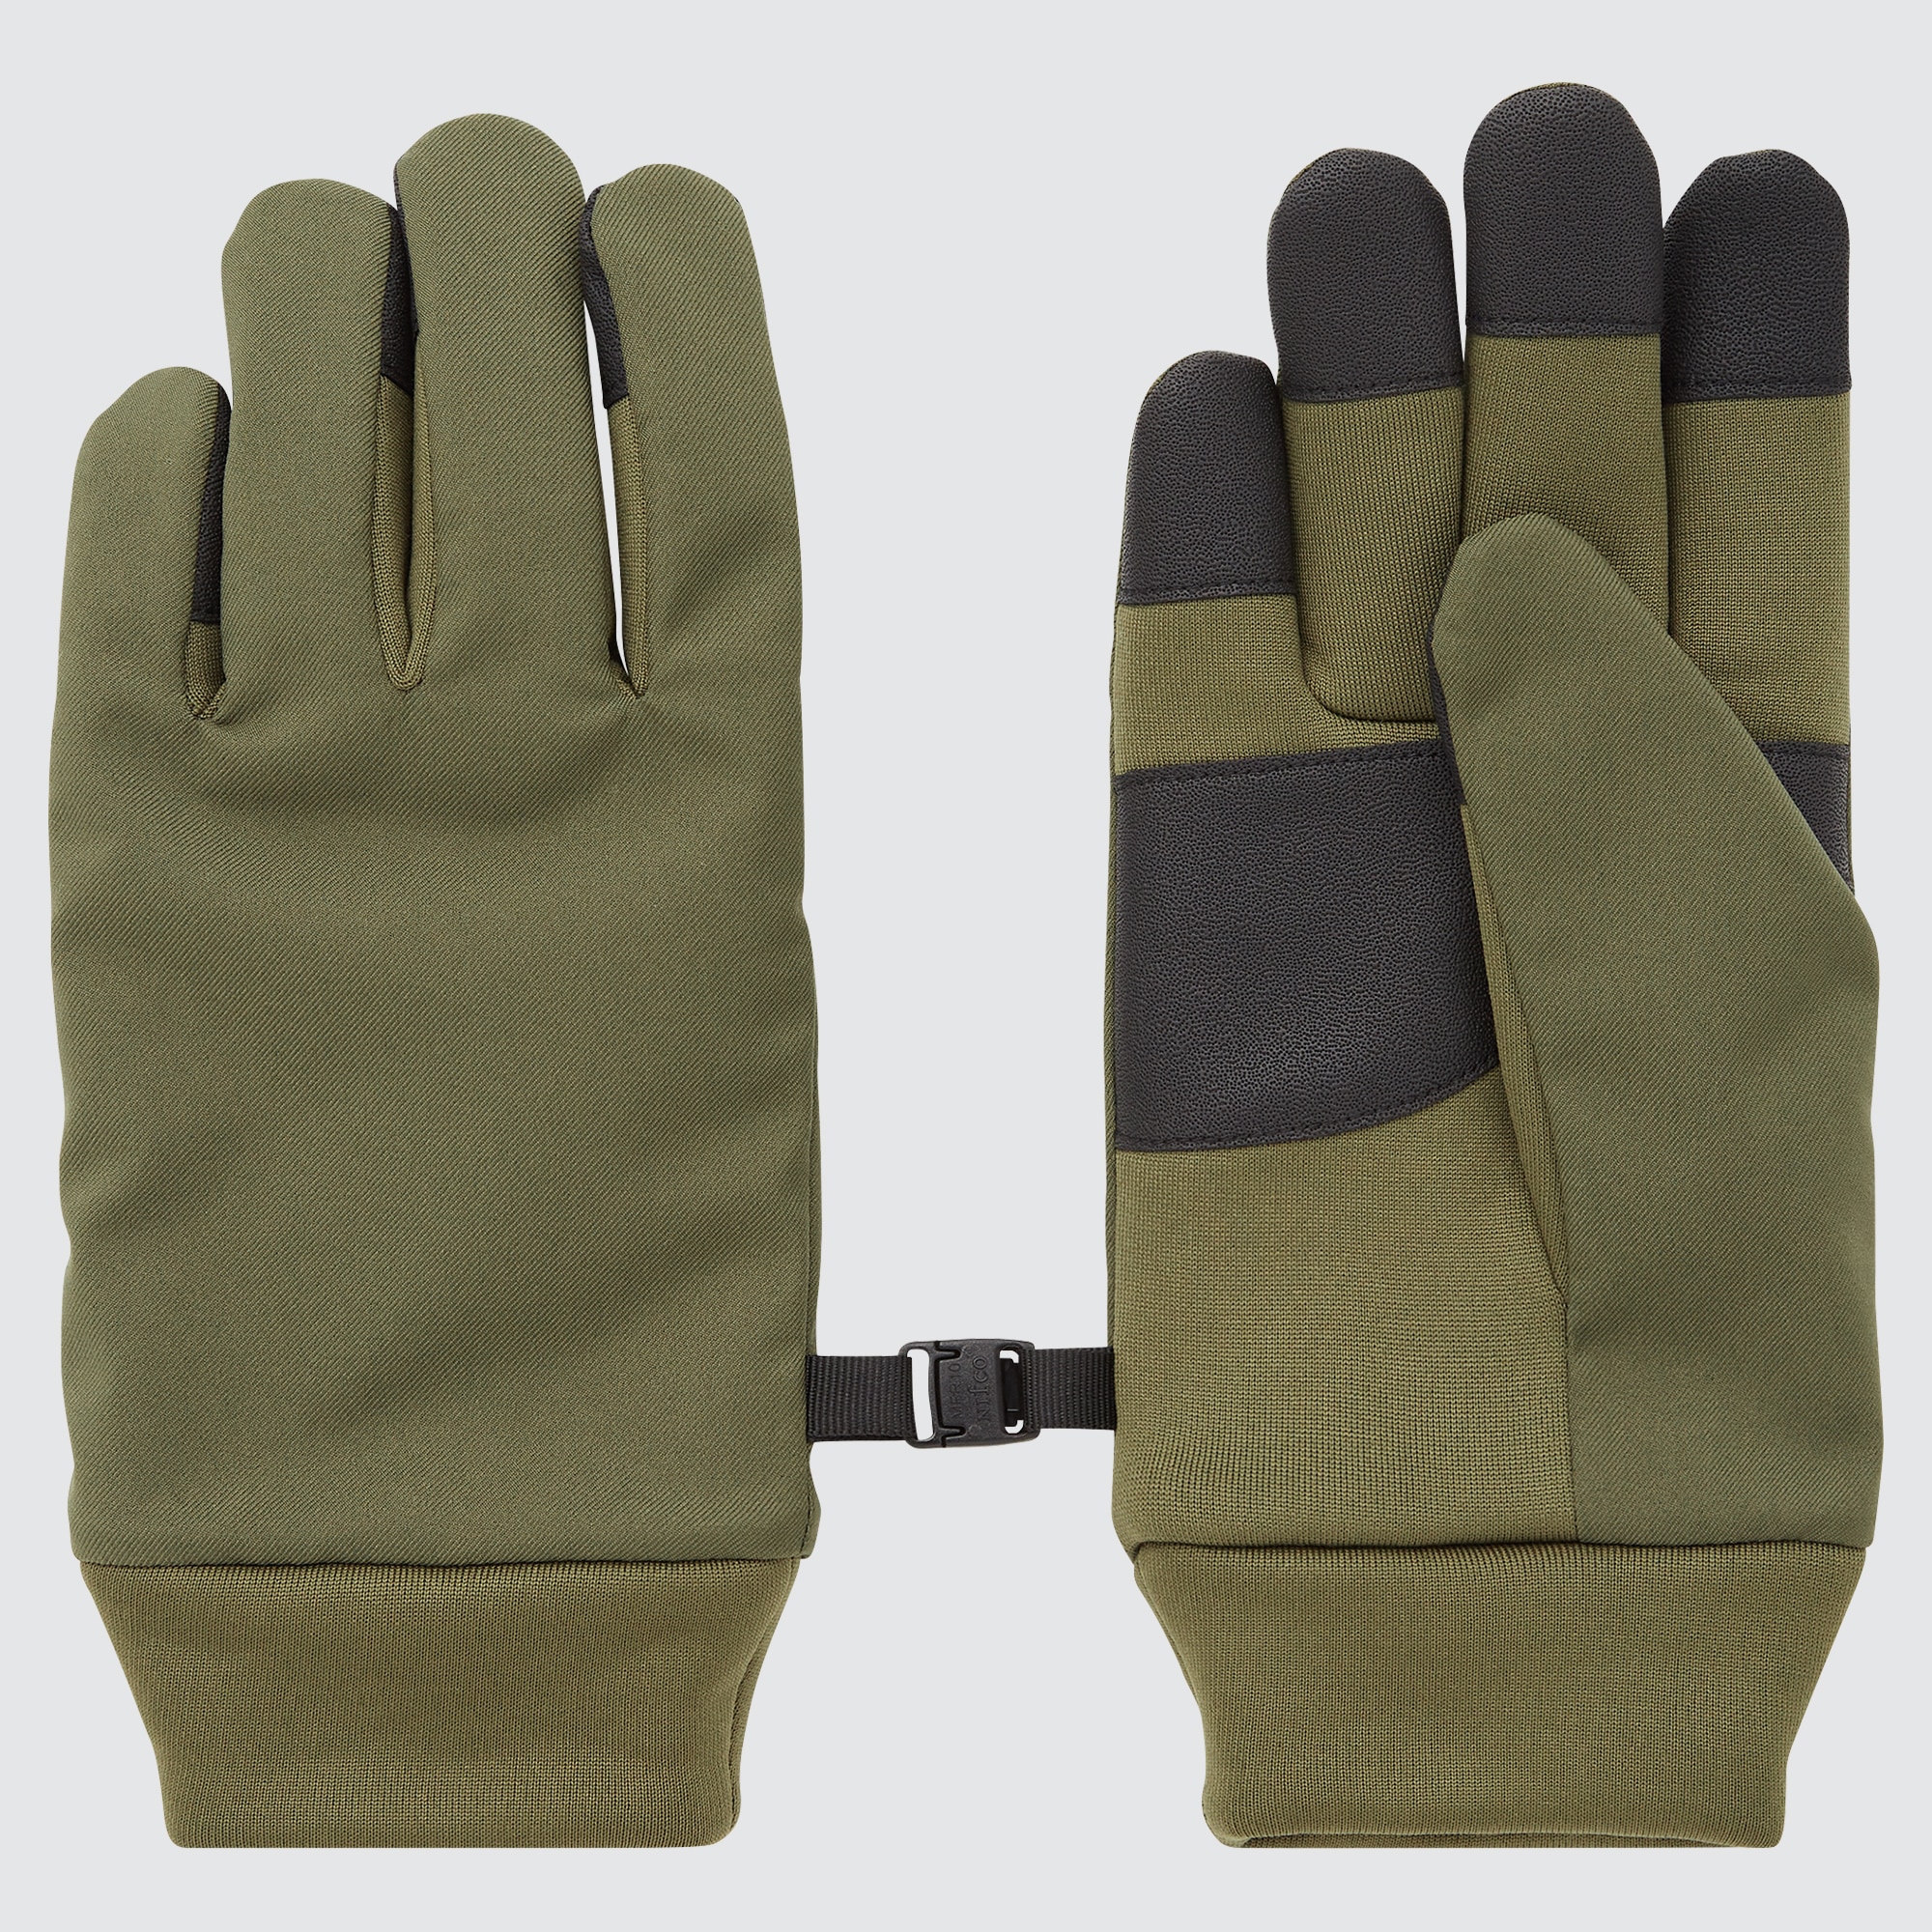 HEATTECH-Lined Function Gloves